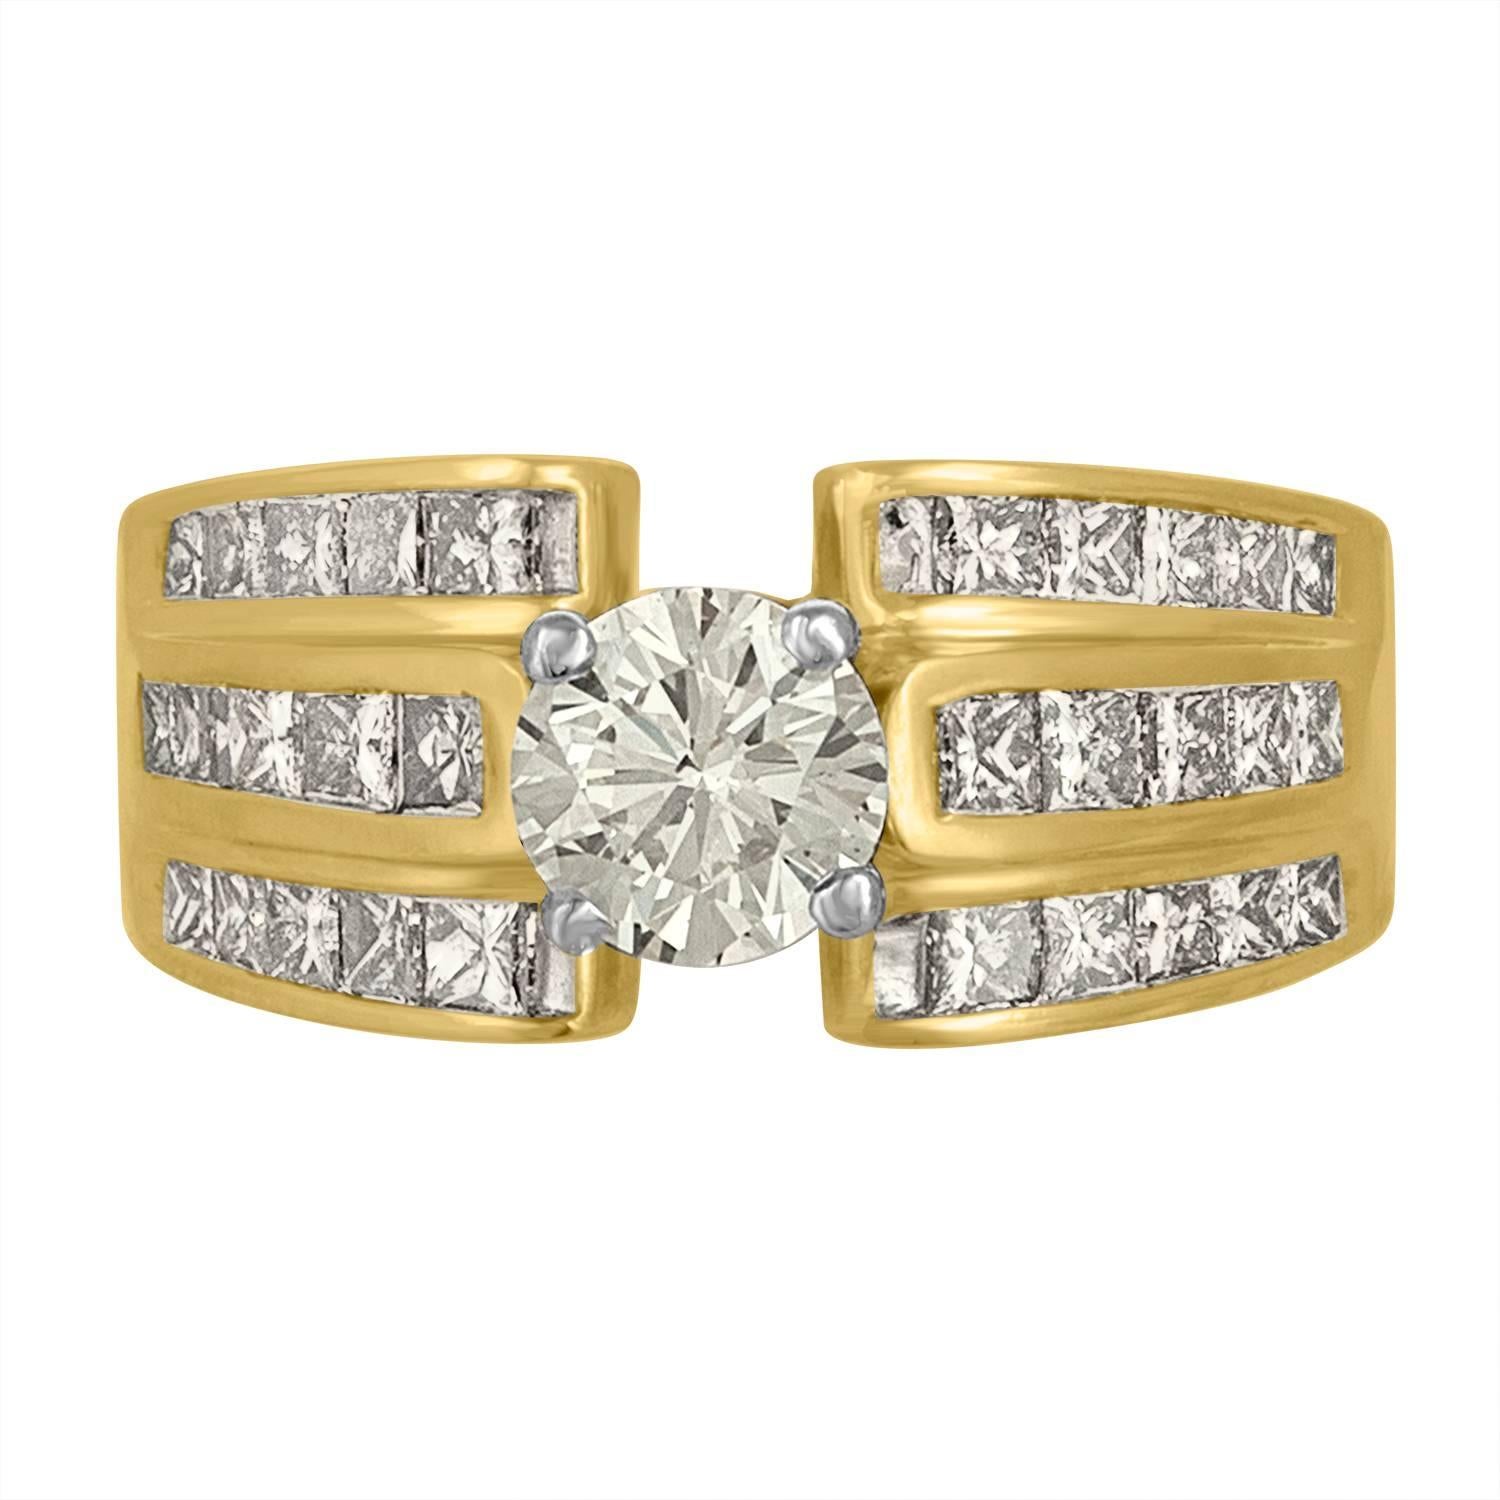 The Brilliant Diamond is set in Two Color Gold Ring Mounting. On the Shank, which is made from 14 Karat Yellow Gold, you can find 30 Princess Cuts Diamonds which are Estimated to be 0.05 Carat Each, Totaling to 2.10 Carats in all.  The Princess Cut